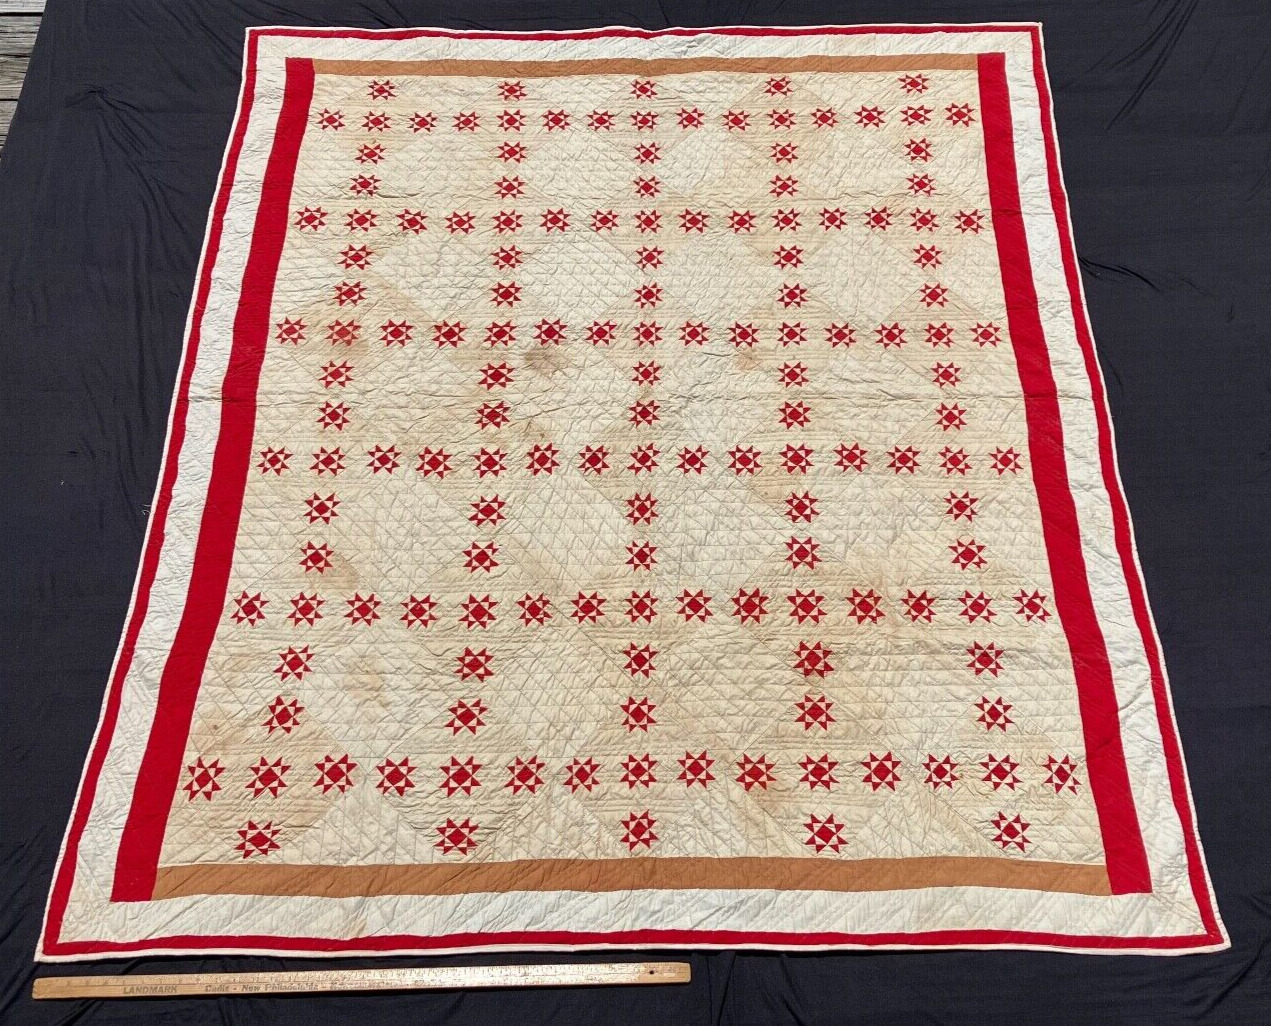 Antique 1880's Red and White Ohio Star Patchwork Quilt. Small Pieces